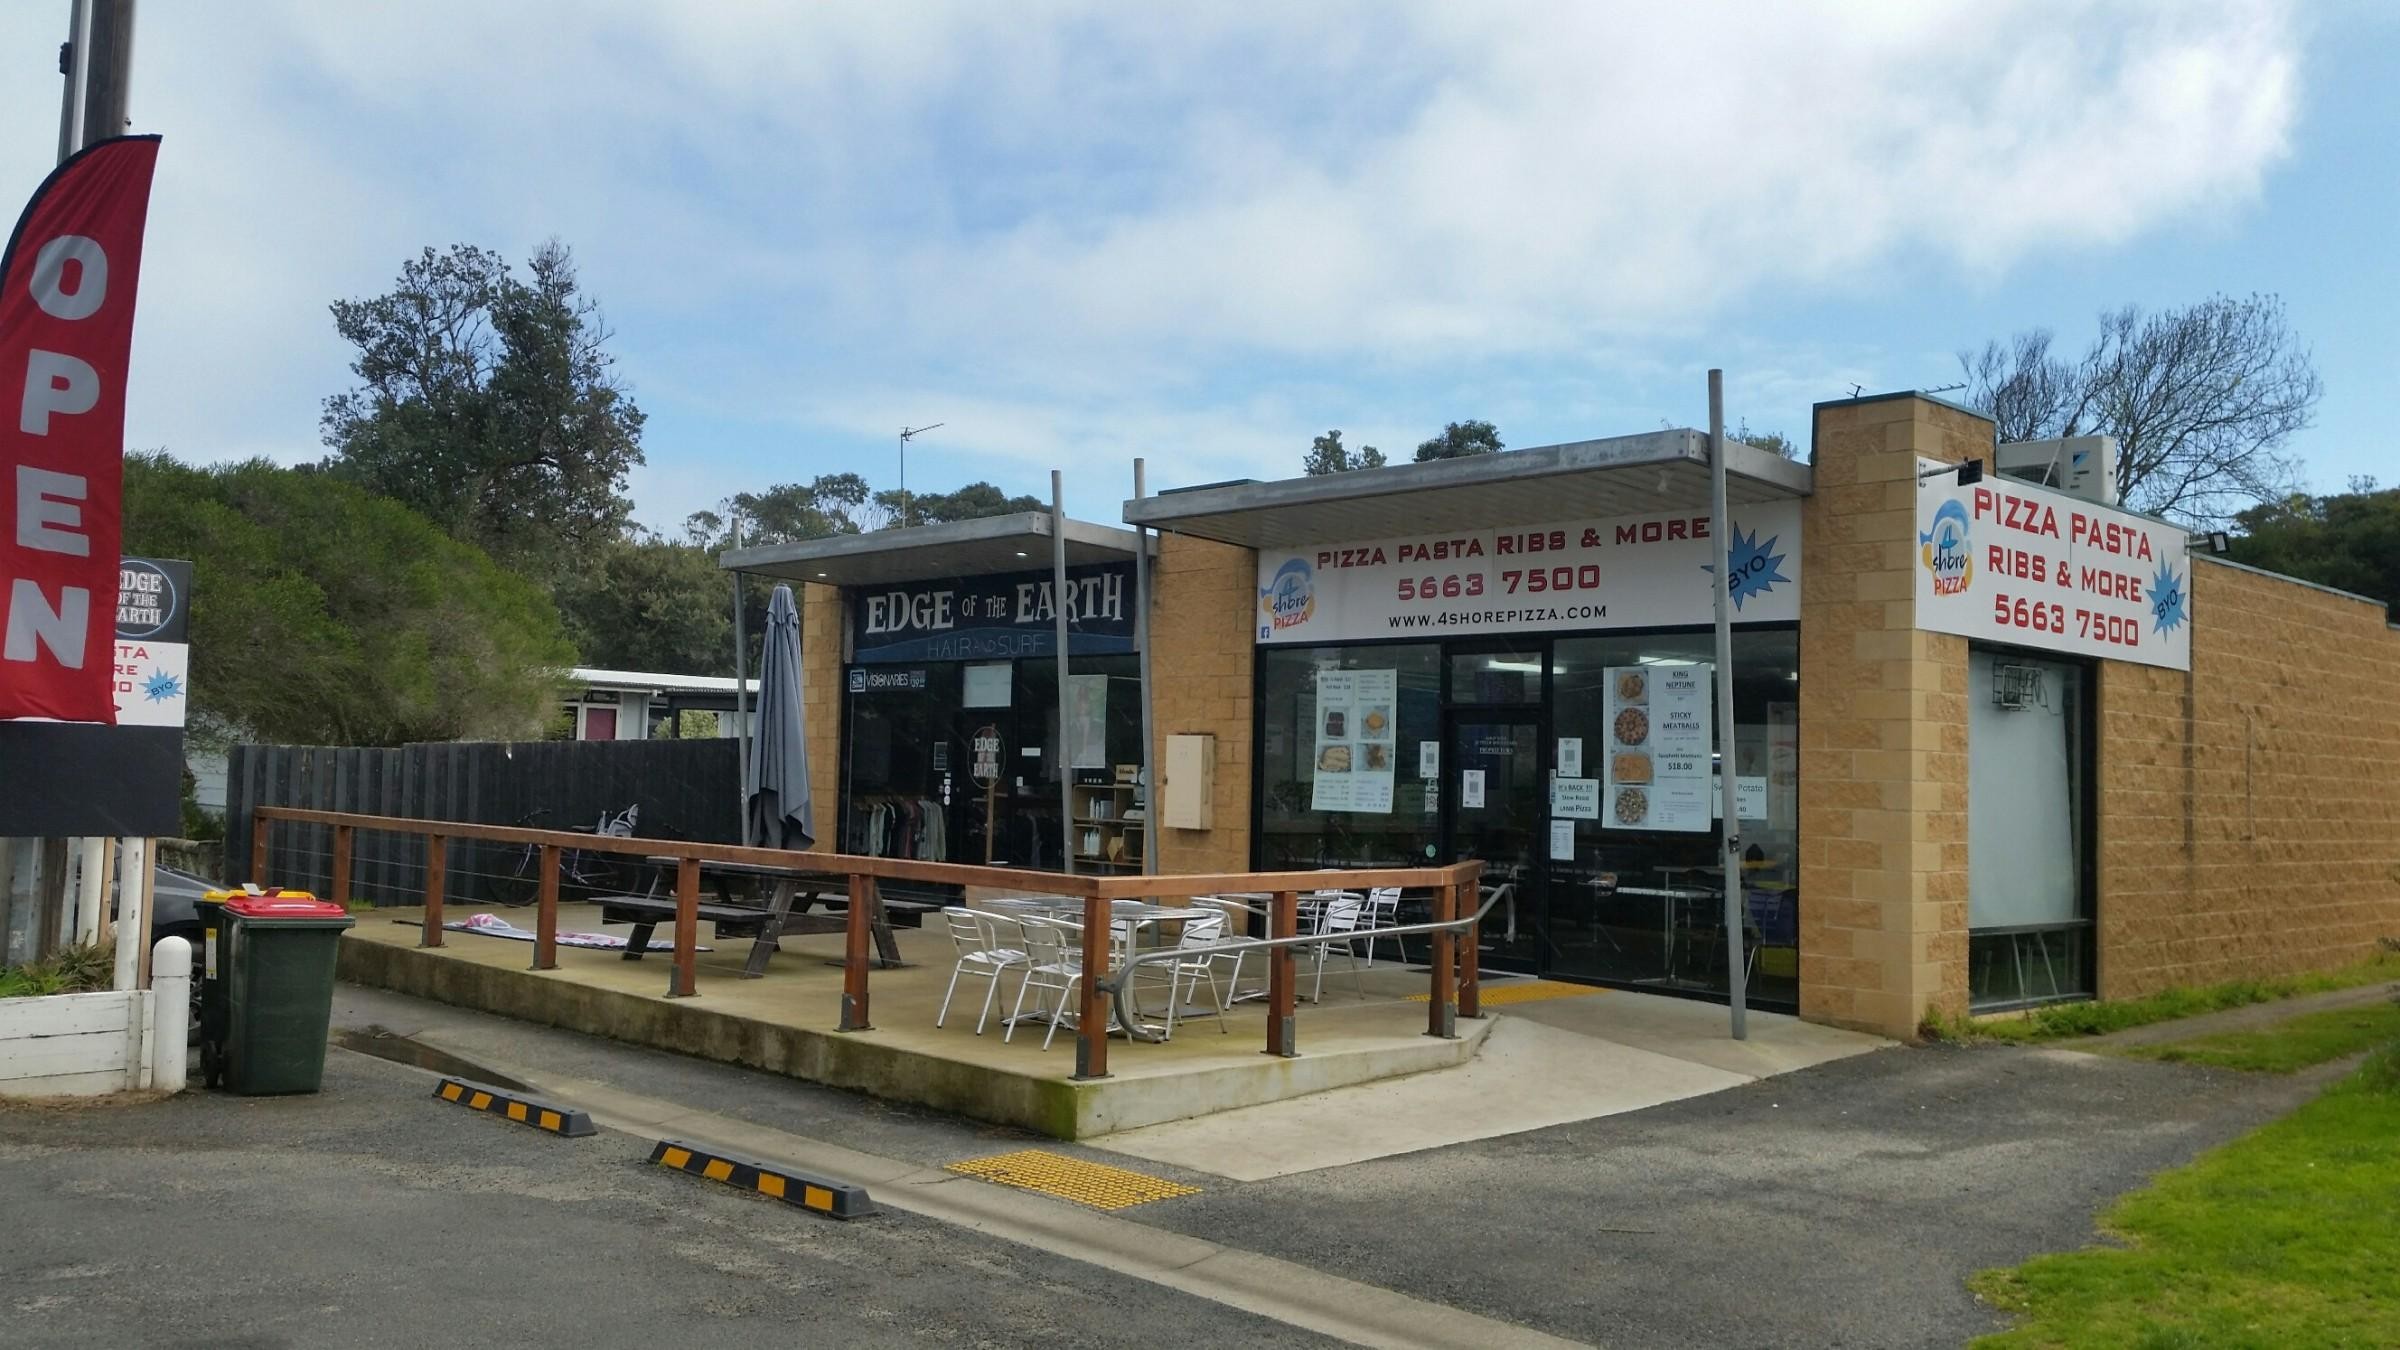 BEACHSIDE LICENCED PIZZA BAR / TAKE AWAYBusiness For Sale